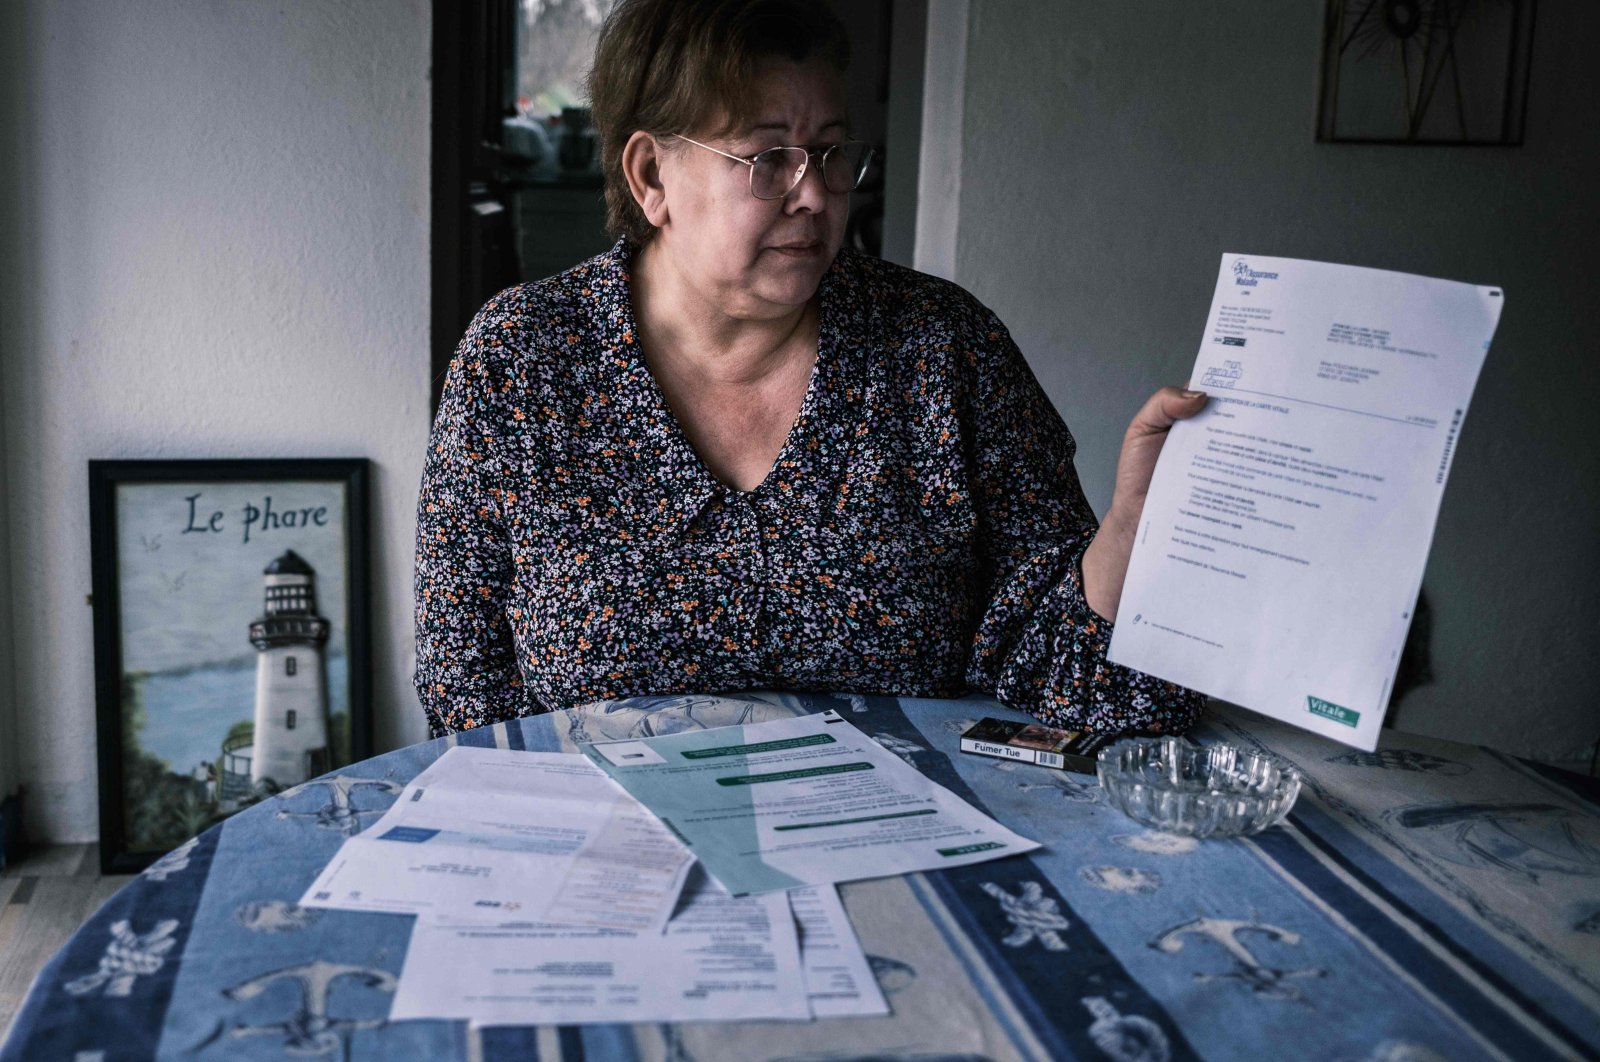 Jeanne Pouchain who, since November 2017, has been declared dead by the justice system after being convicted by the Prud'hommes, shows some paperwork, in Saint-Joseph, France, Jan. 8, 2021. (AFP Photo)